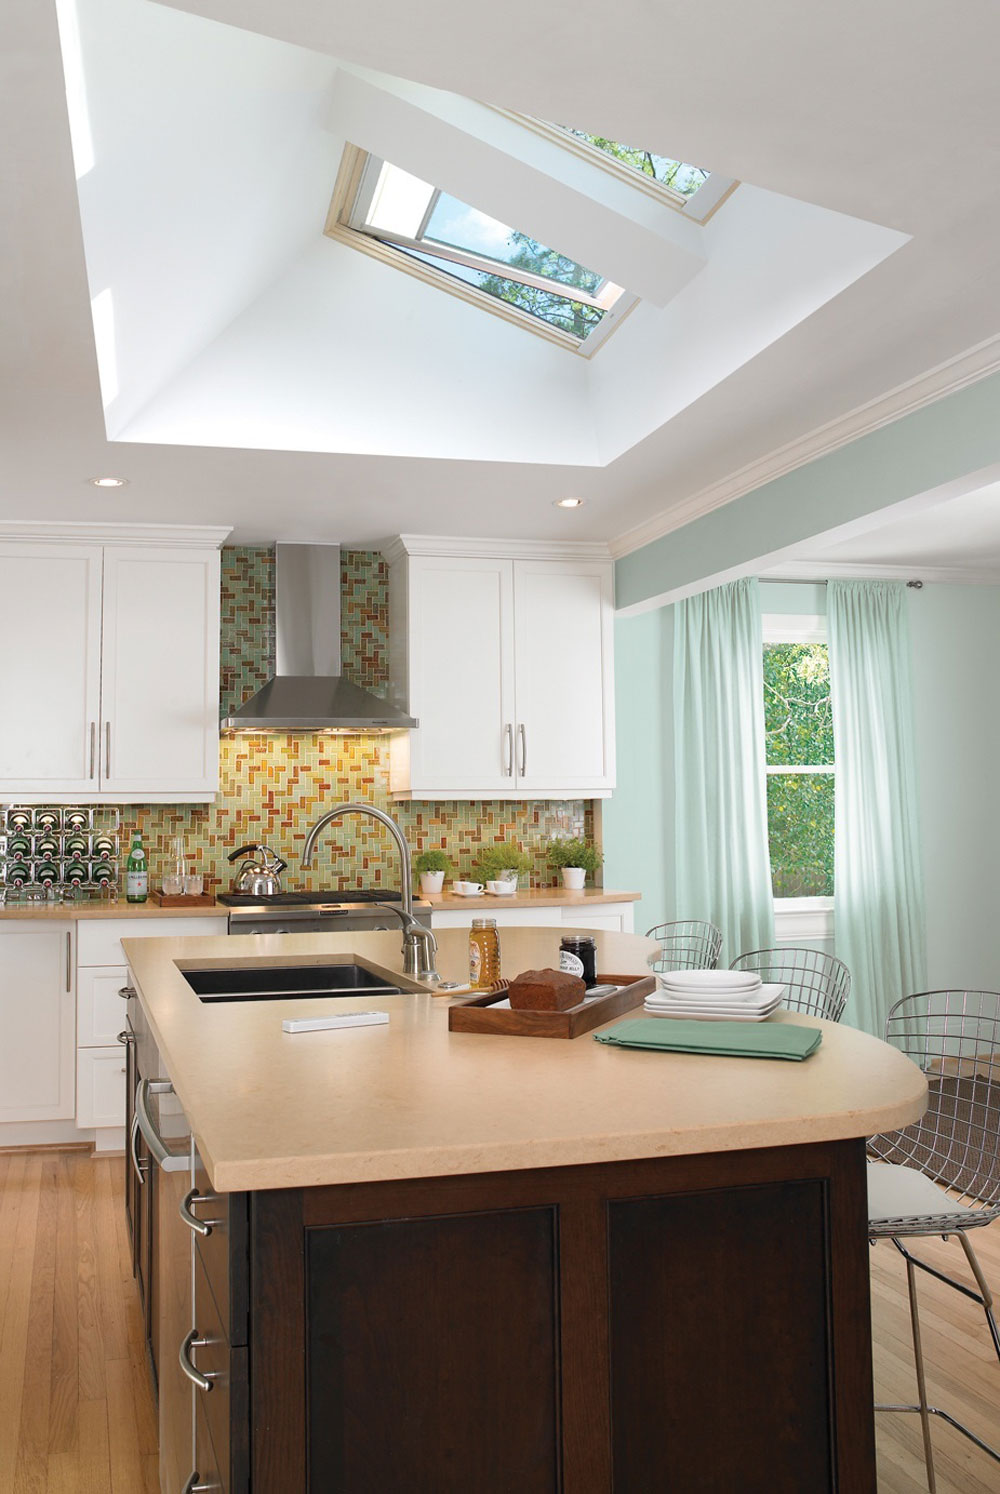 Create Natural Lighting from Skylights